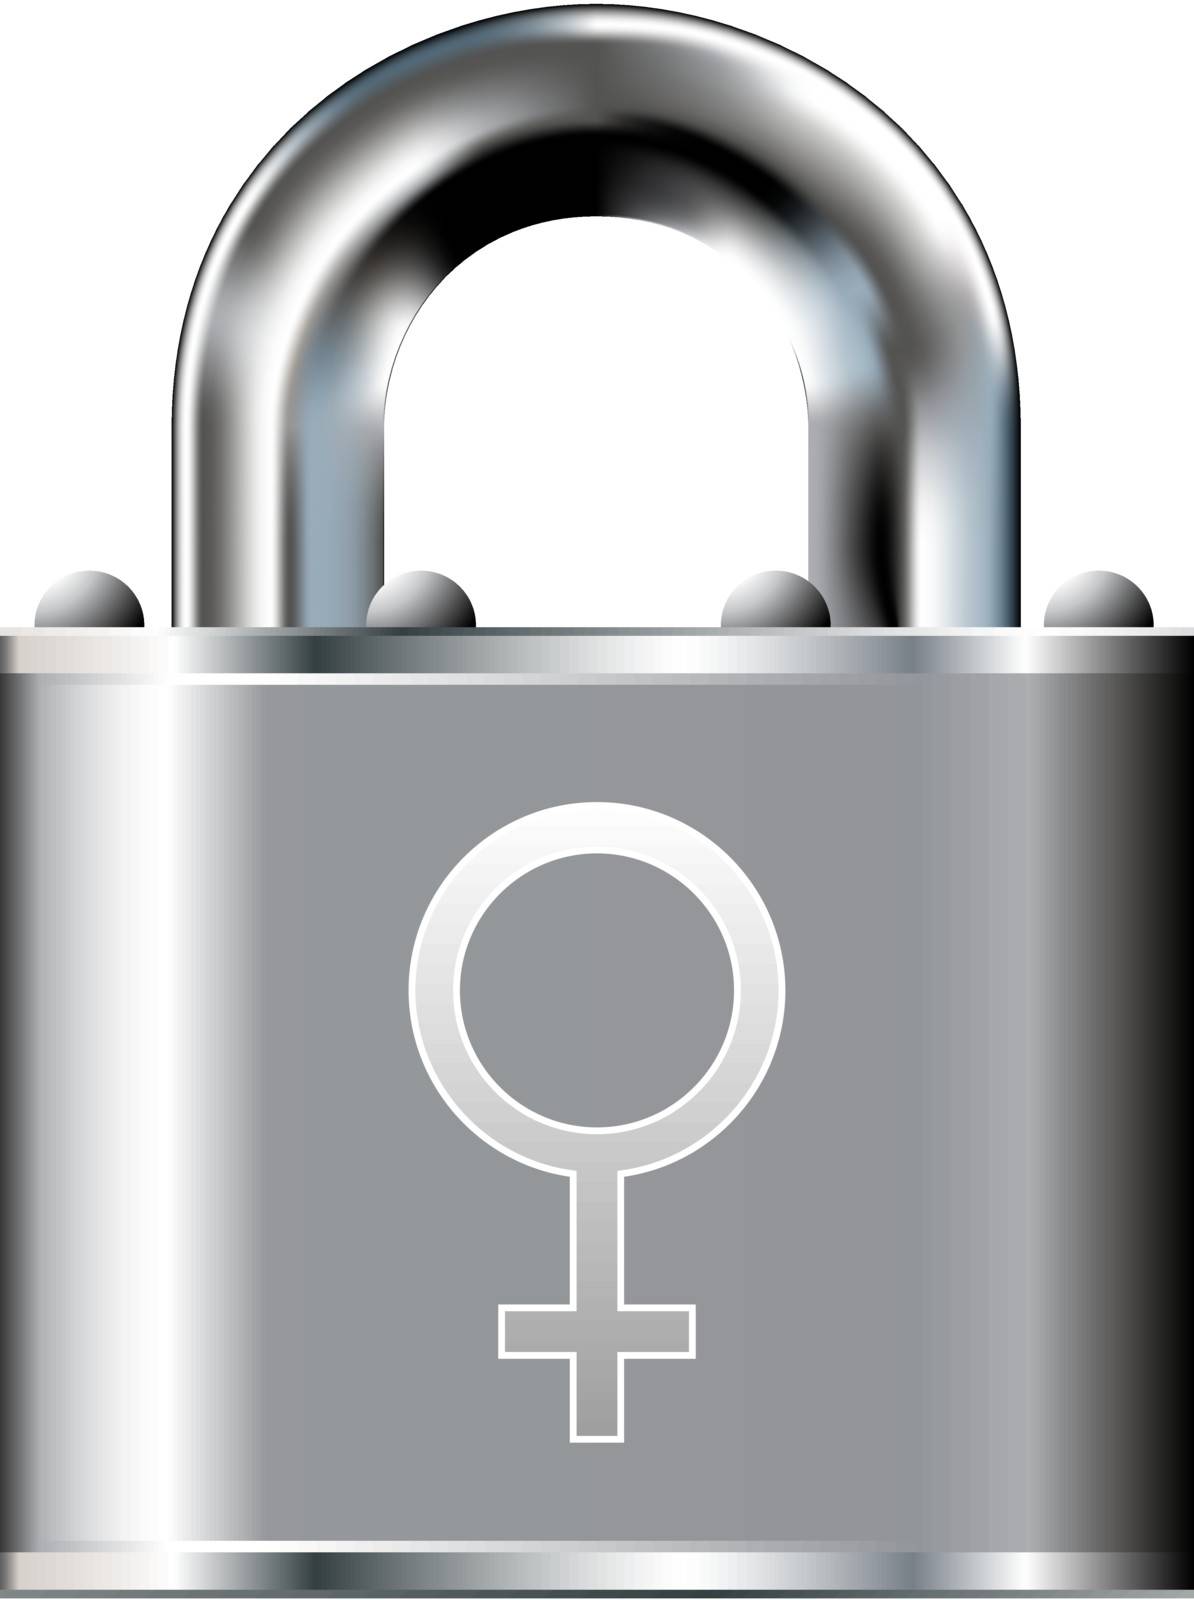 Female security icon by lhfgraphics